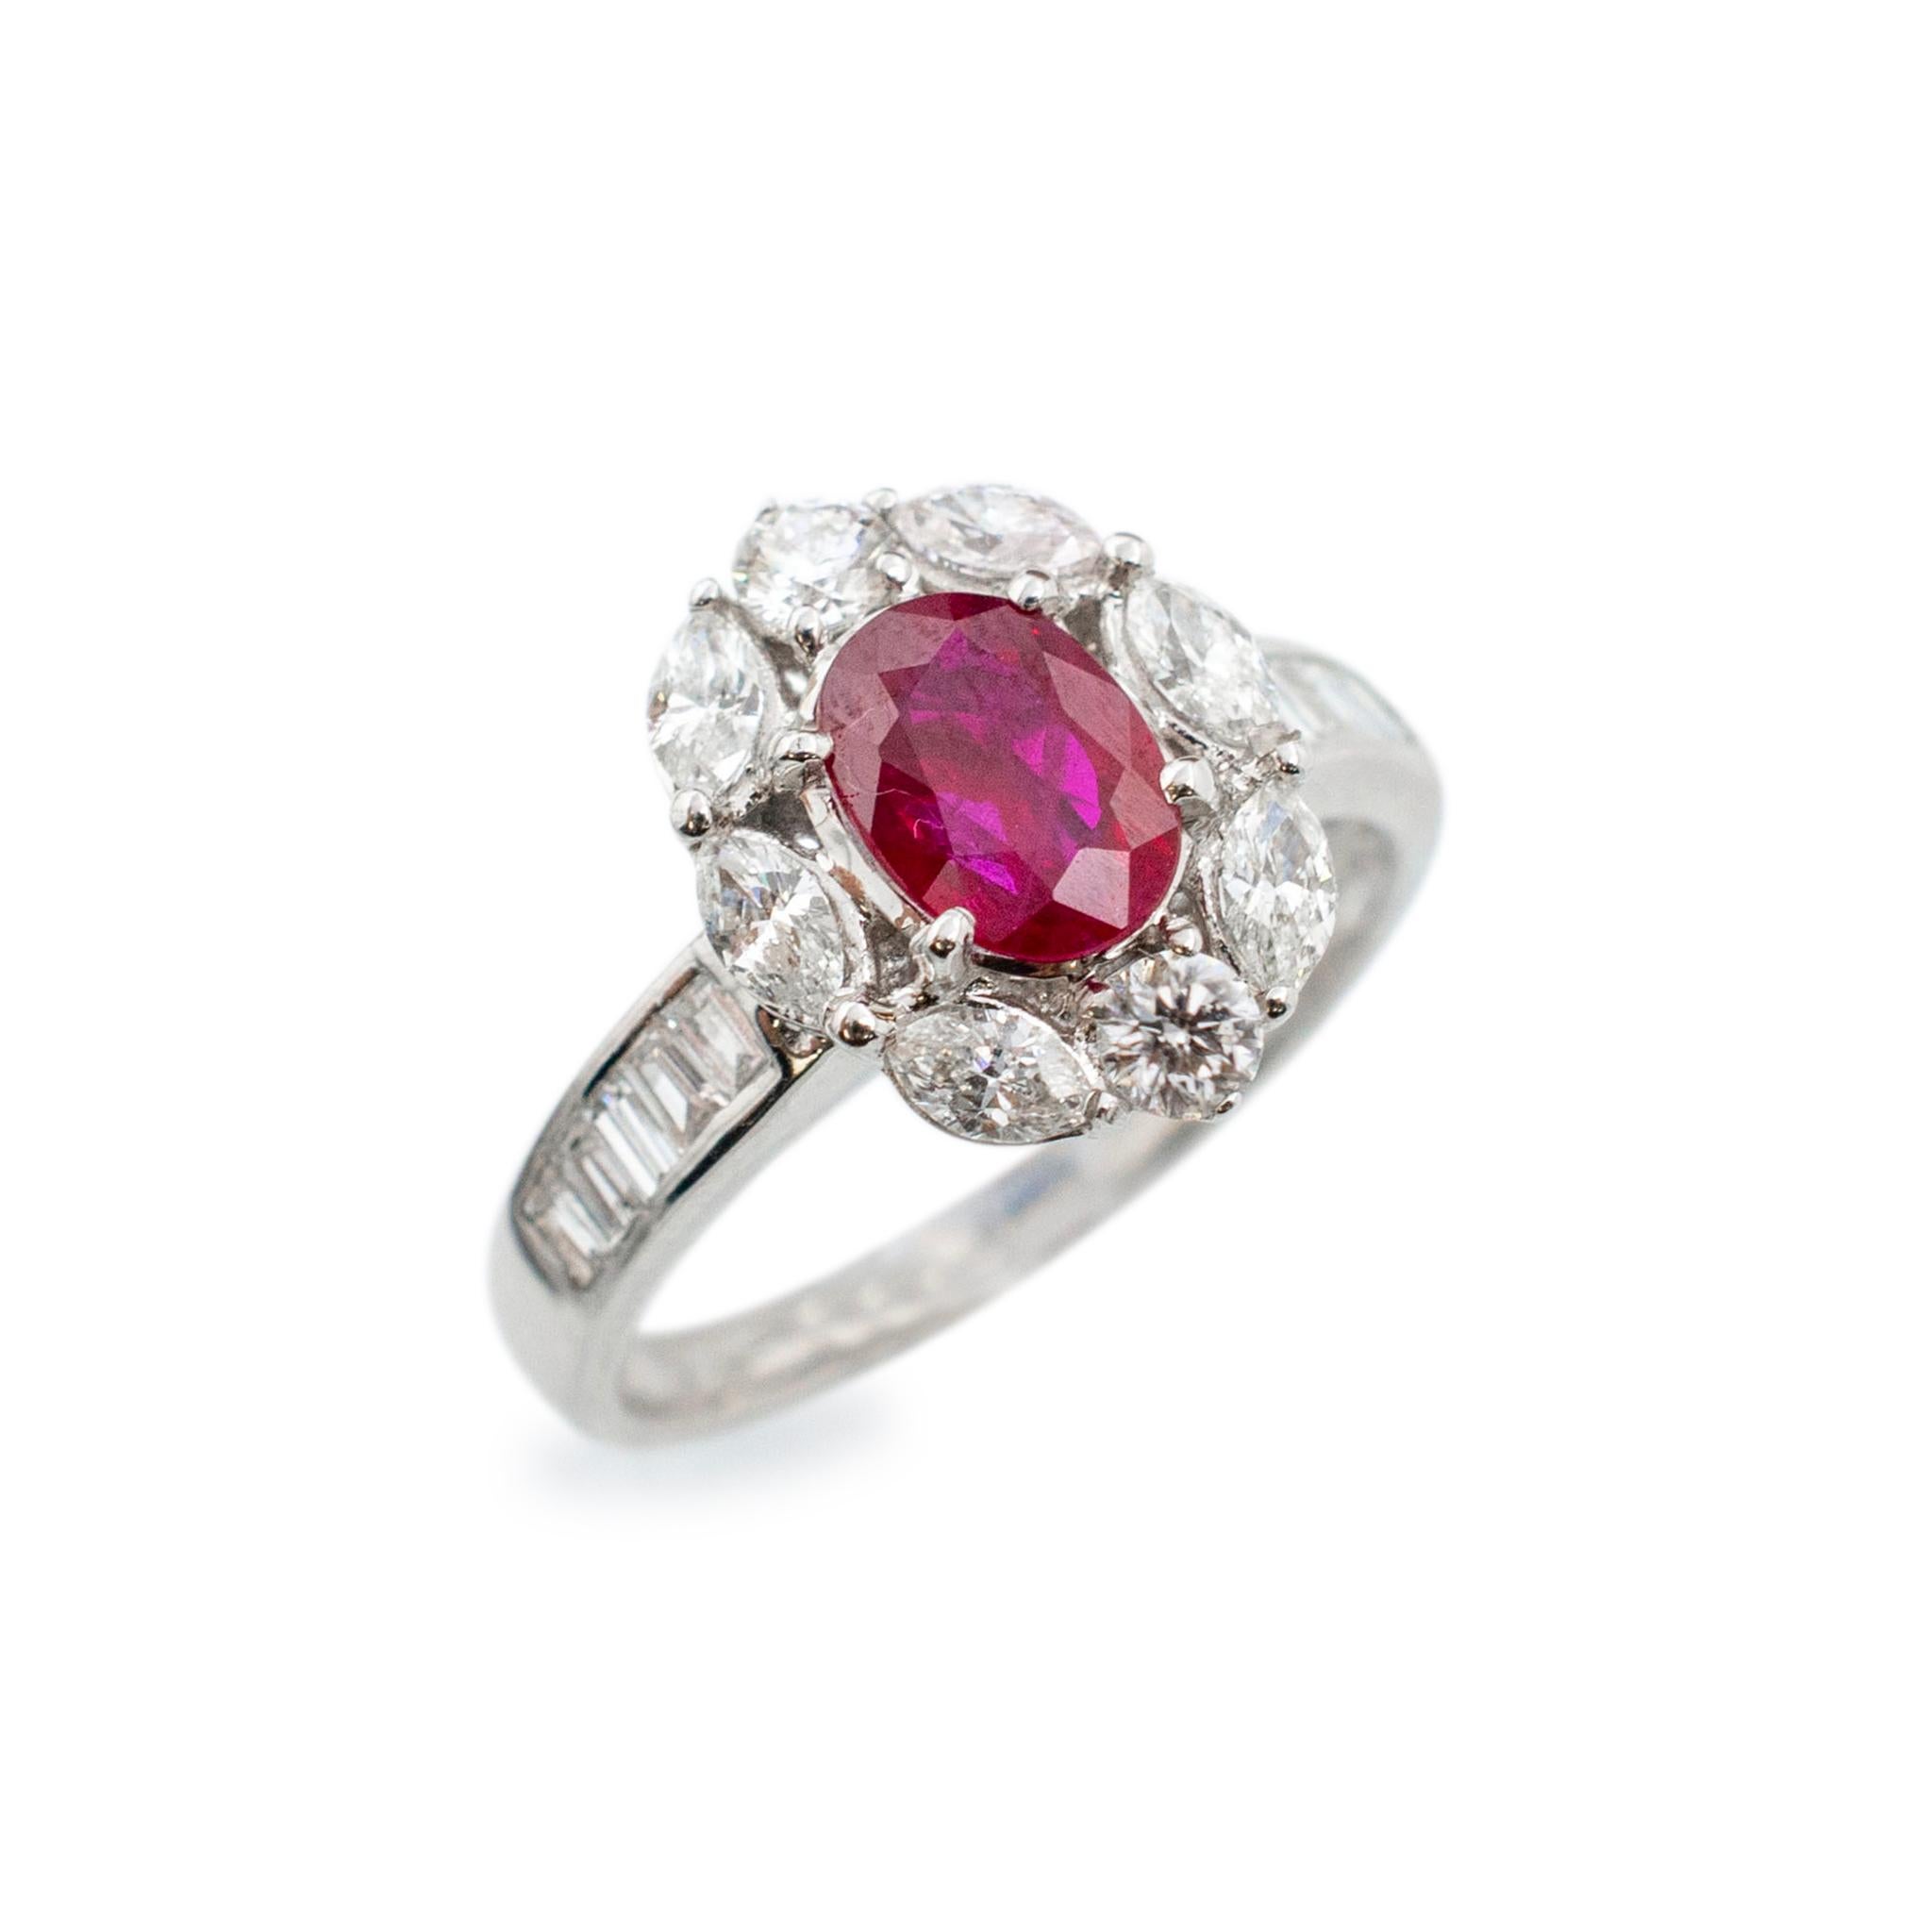 Gender: Ladies

Metal Type: 18K White Gold

Size: 6.75

Halo head measurements: 14.15mm x 11.10mm

Shank maximum width: 3.90mm

Weight: 4.40 grams

Ladies 18K white gold diamond and ruby cocktail ring with a half round shank.  Engraved with